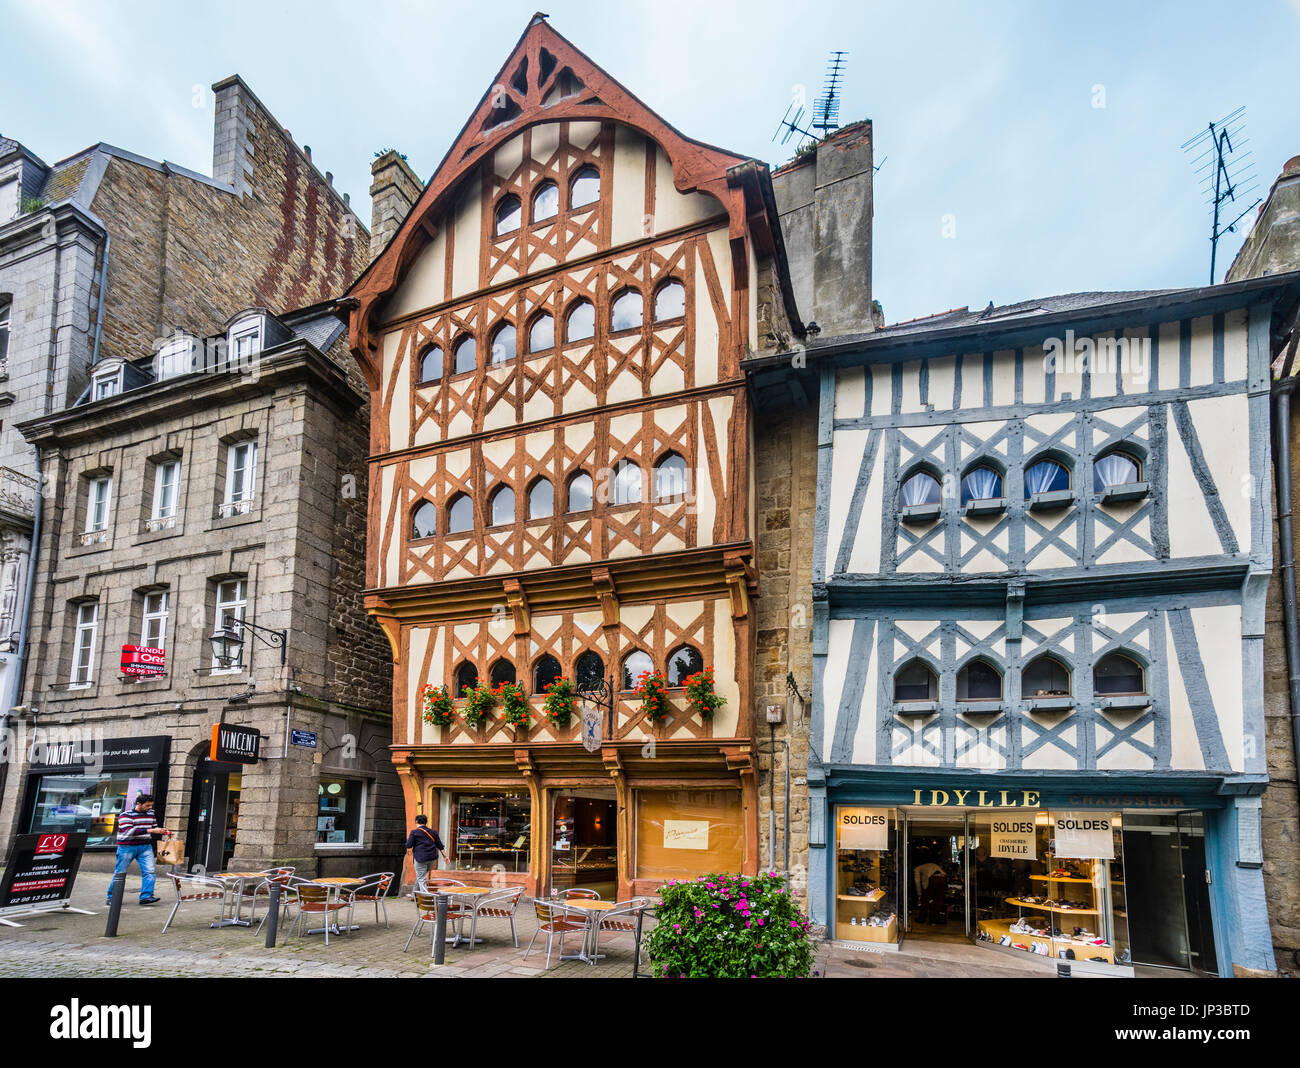 France, Brittany, Cotes-d'Armor department, Guingamp, Rue Edouard Ollivro, 16th century half-timbered houses in the historic town center Stock Photo